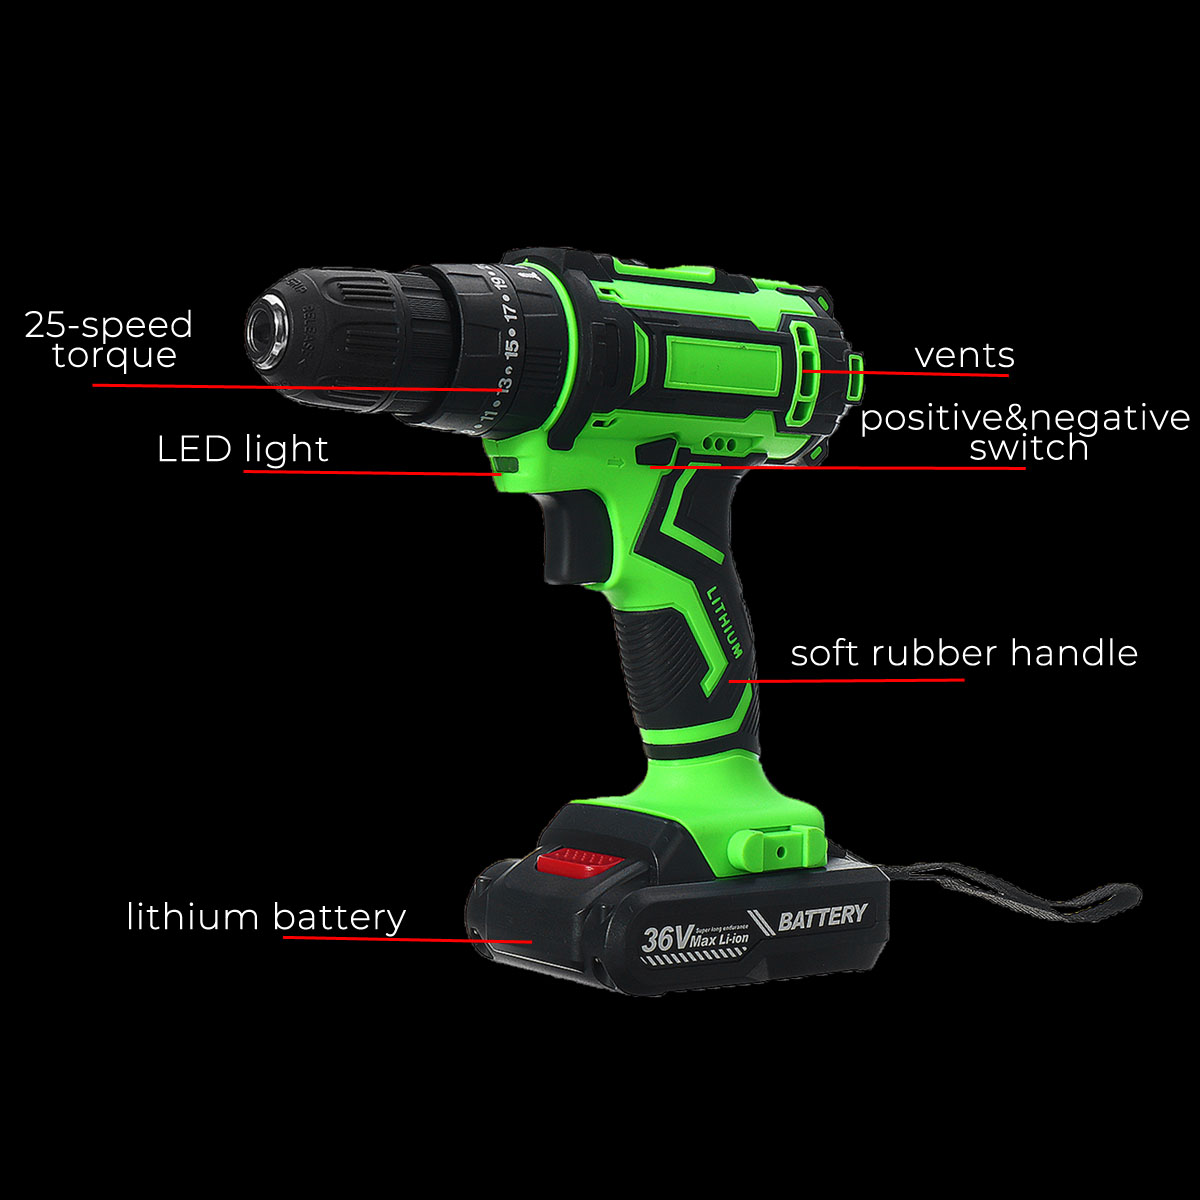 36V-Electric-Hand-Drill-Driver-253-Torque-Setting-Power-Drilling-DIY-Work-W-1-Or-2-Li-ion-battery-1582717-9